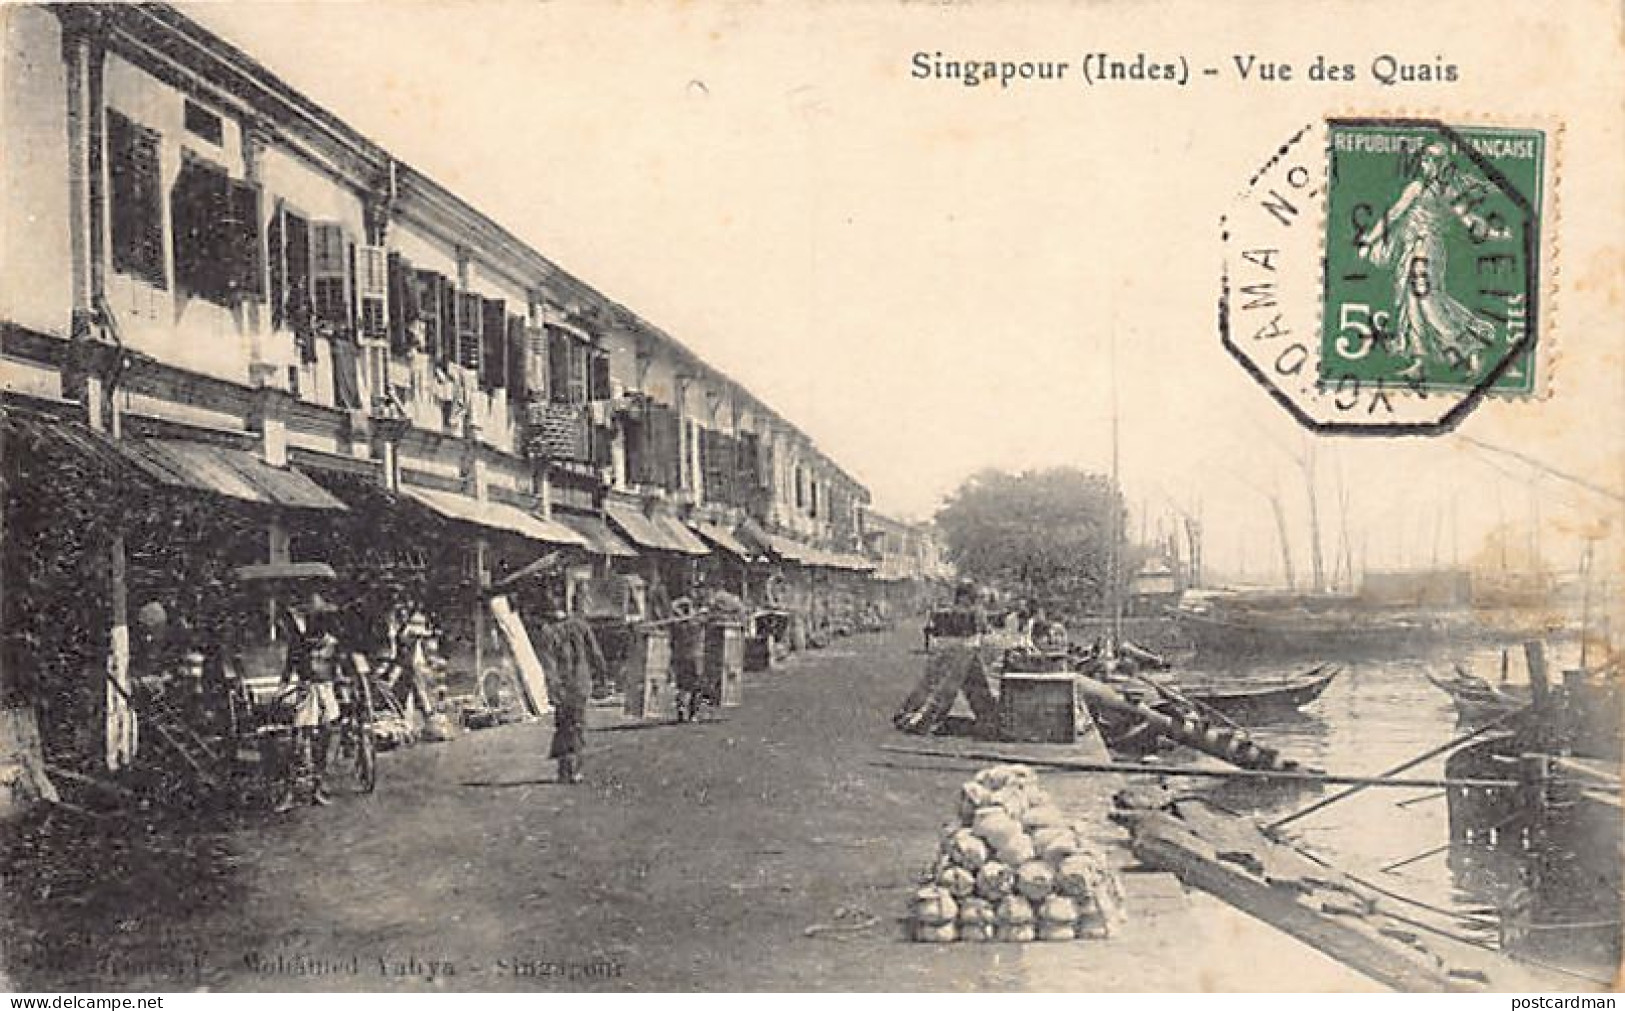 Singapore - View Of The Quays - Publ. H. Grimaud A M. Yahya  - Singapour